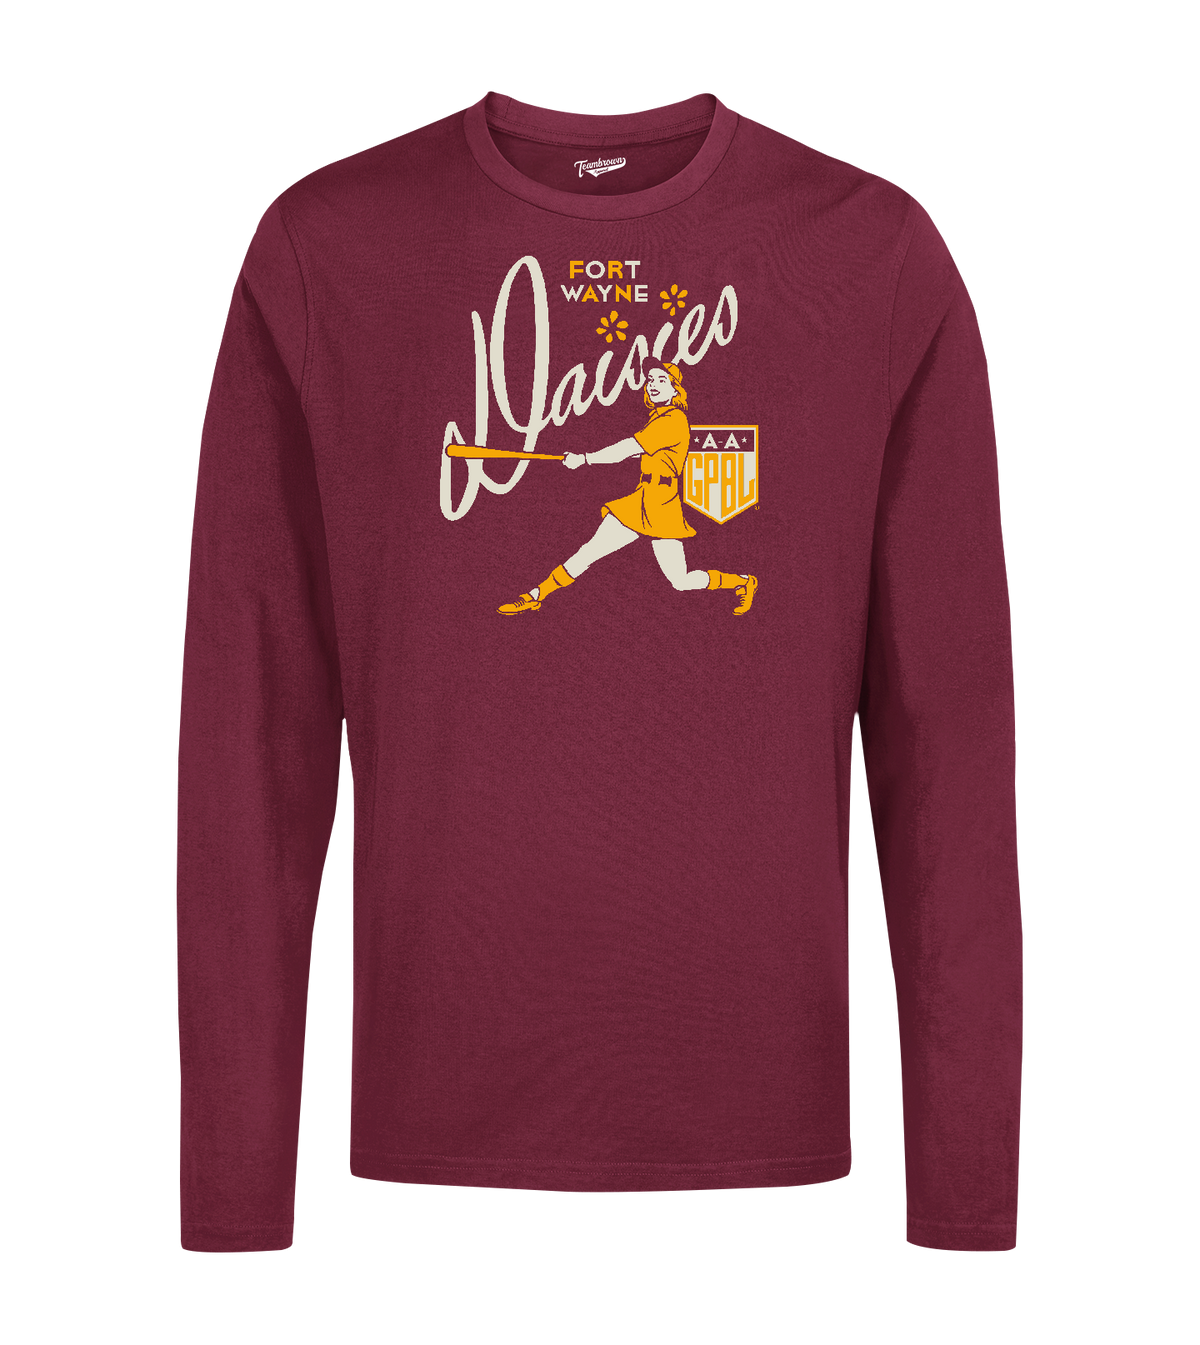 Diamond - Fort Wayne Daisies - Unisex Long Sleeve Crew T-Shirt | Officially Licensed - AAGPBL